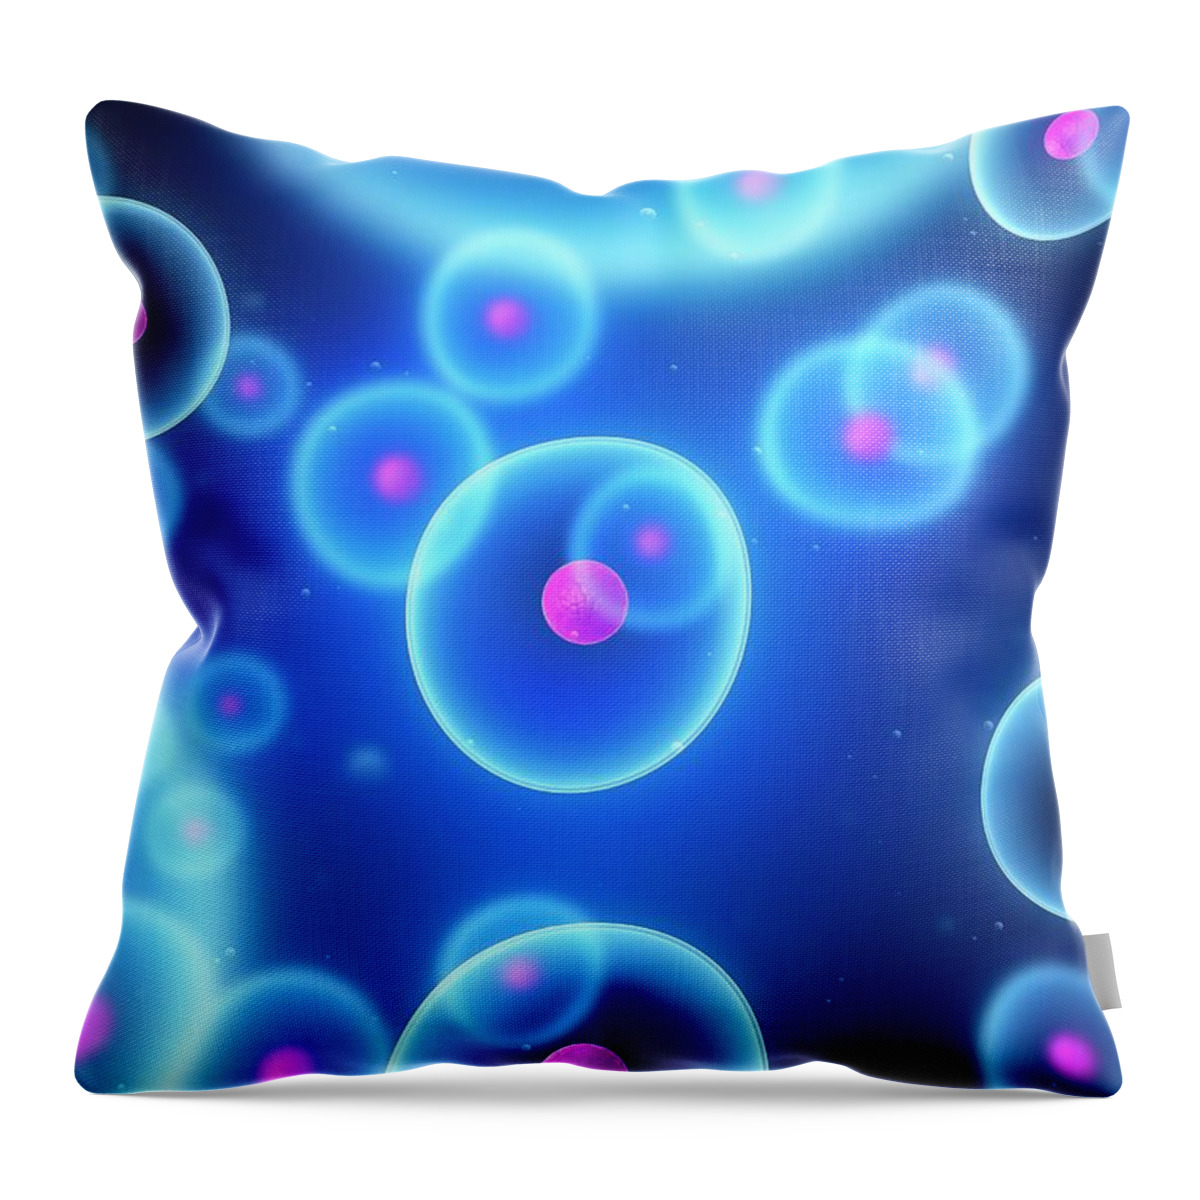 Nucleus Throw Pillow featuring the digital art Cells, Conceptual Artwork by Science Photo Library - Sciepro